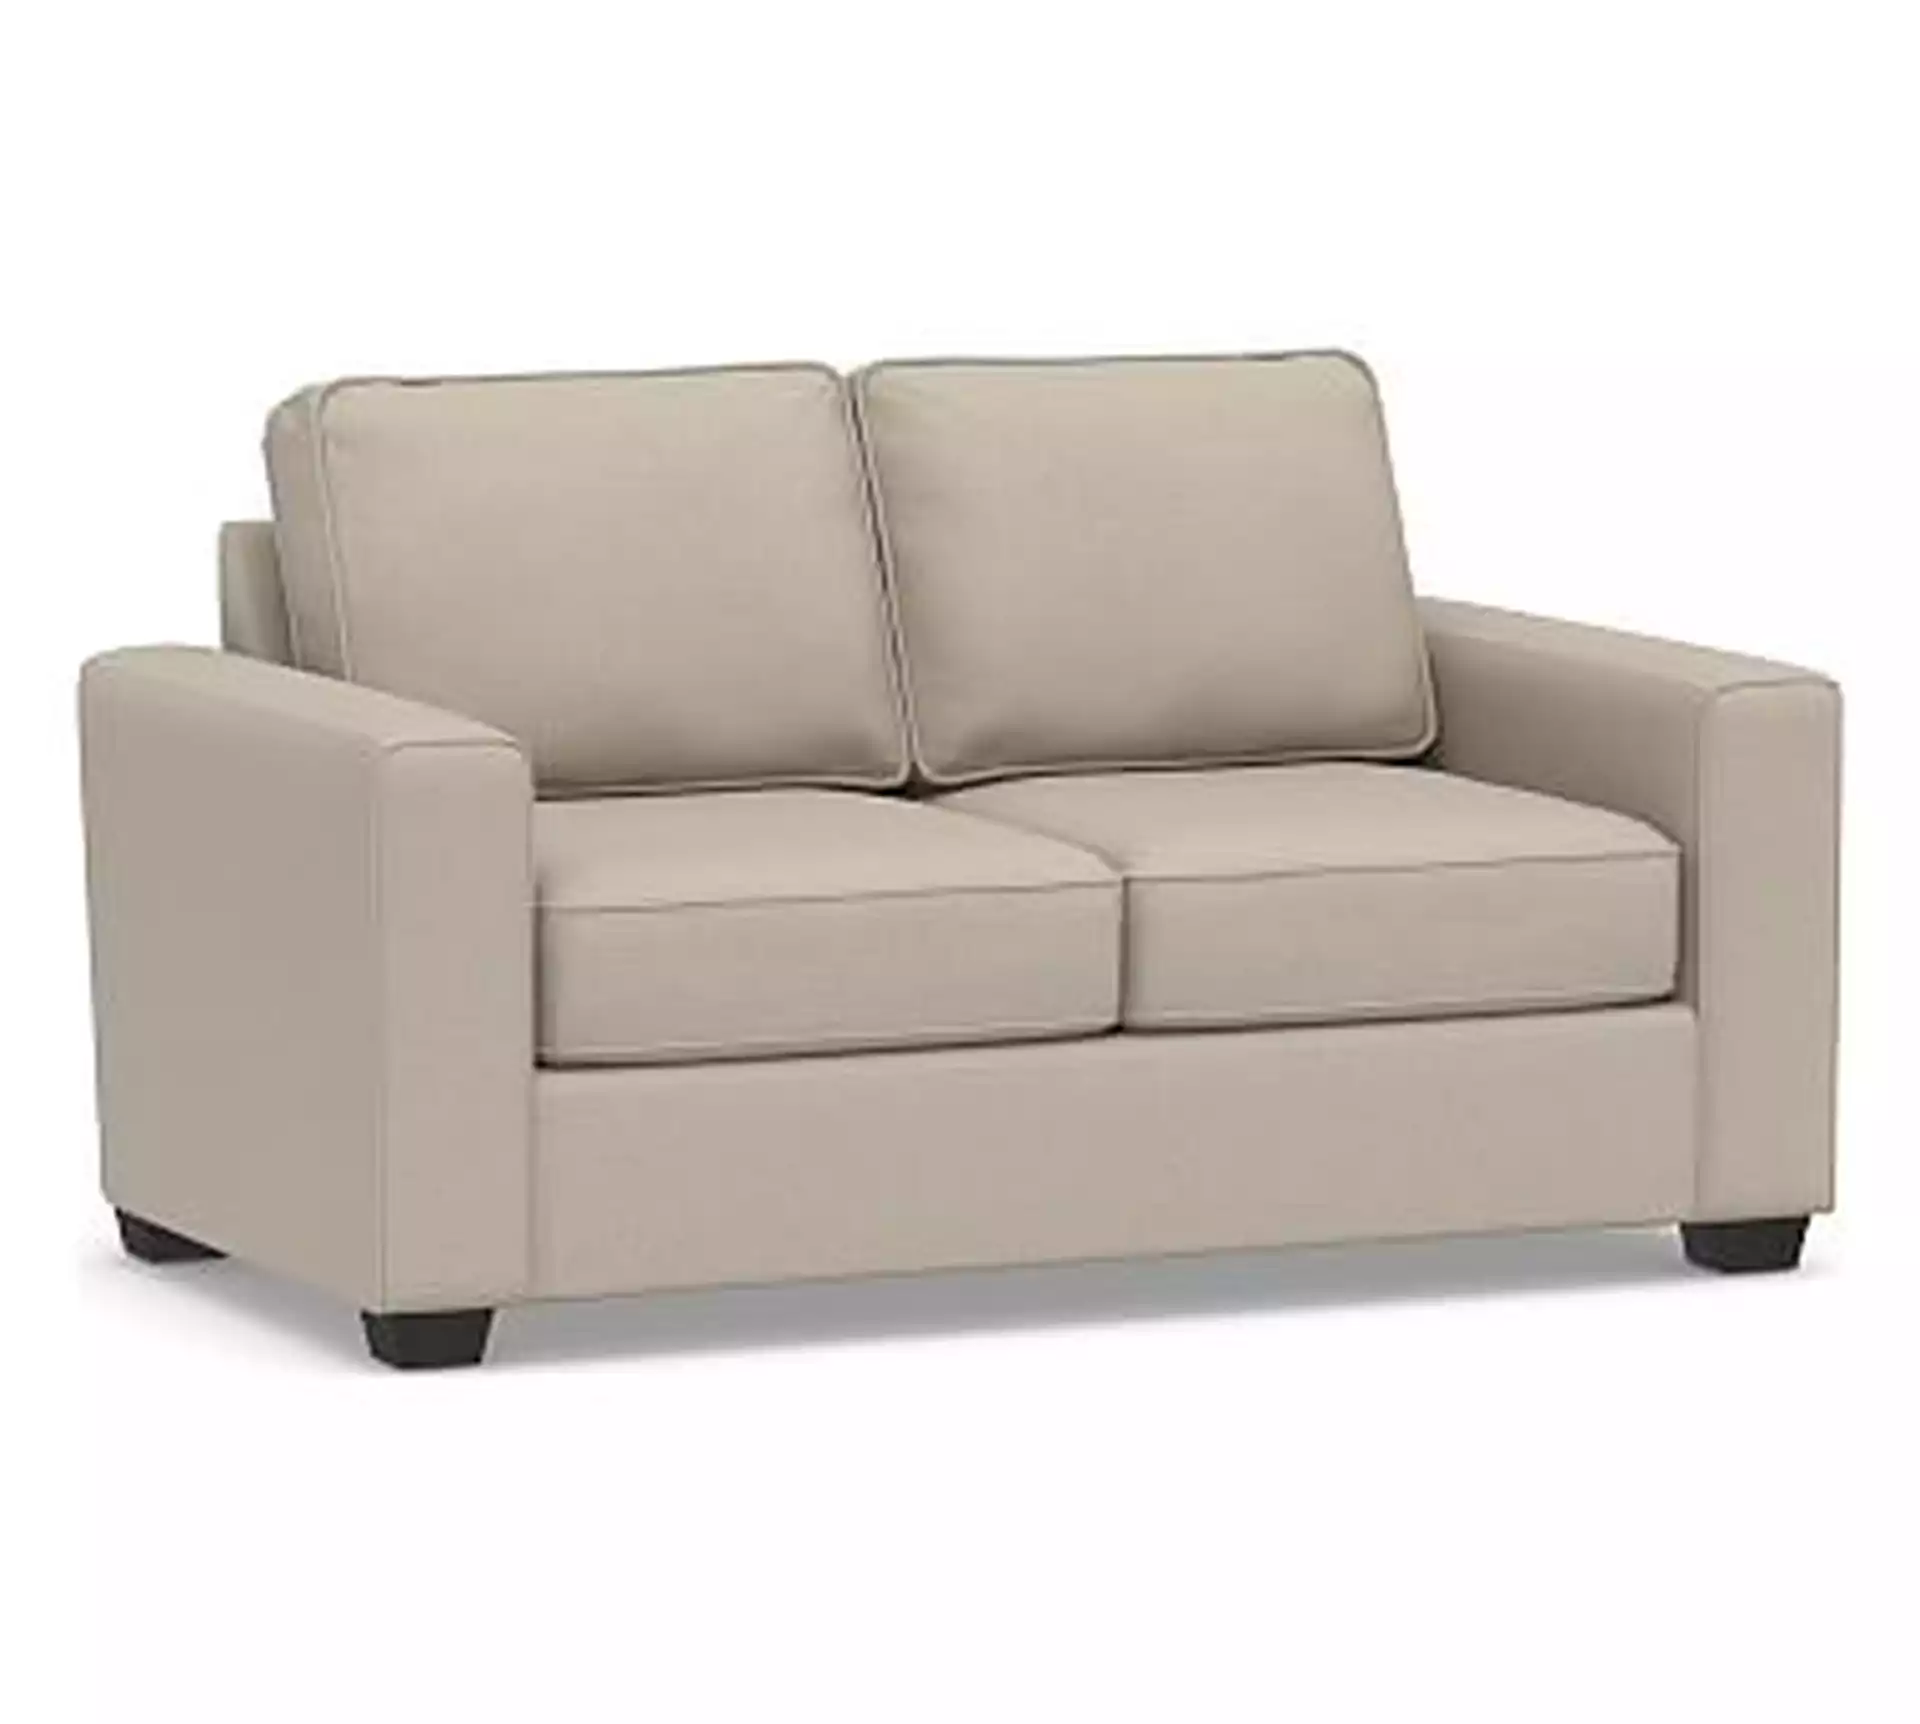 SoMa Fremont Square Arm Upholstered Sofa, Polyester Wrapped Cushions, Brushed Crossweave Natural